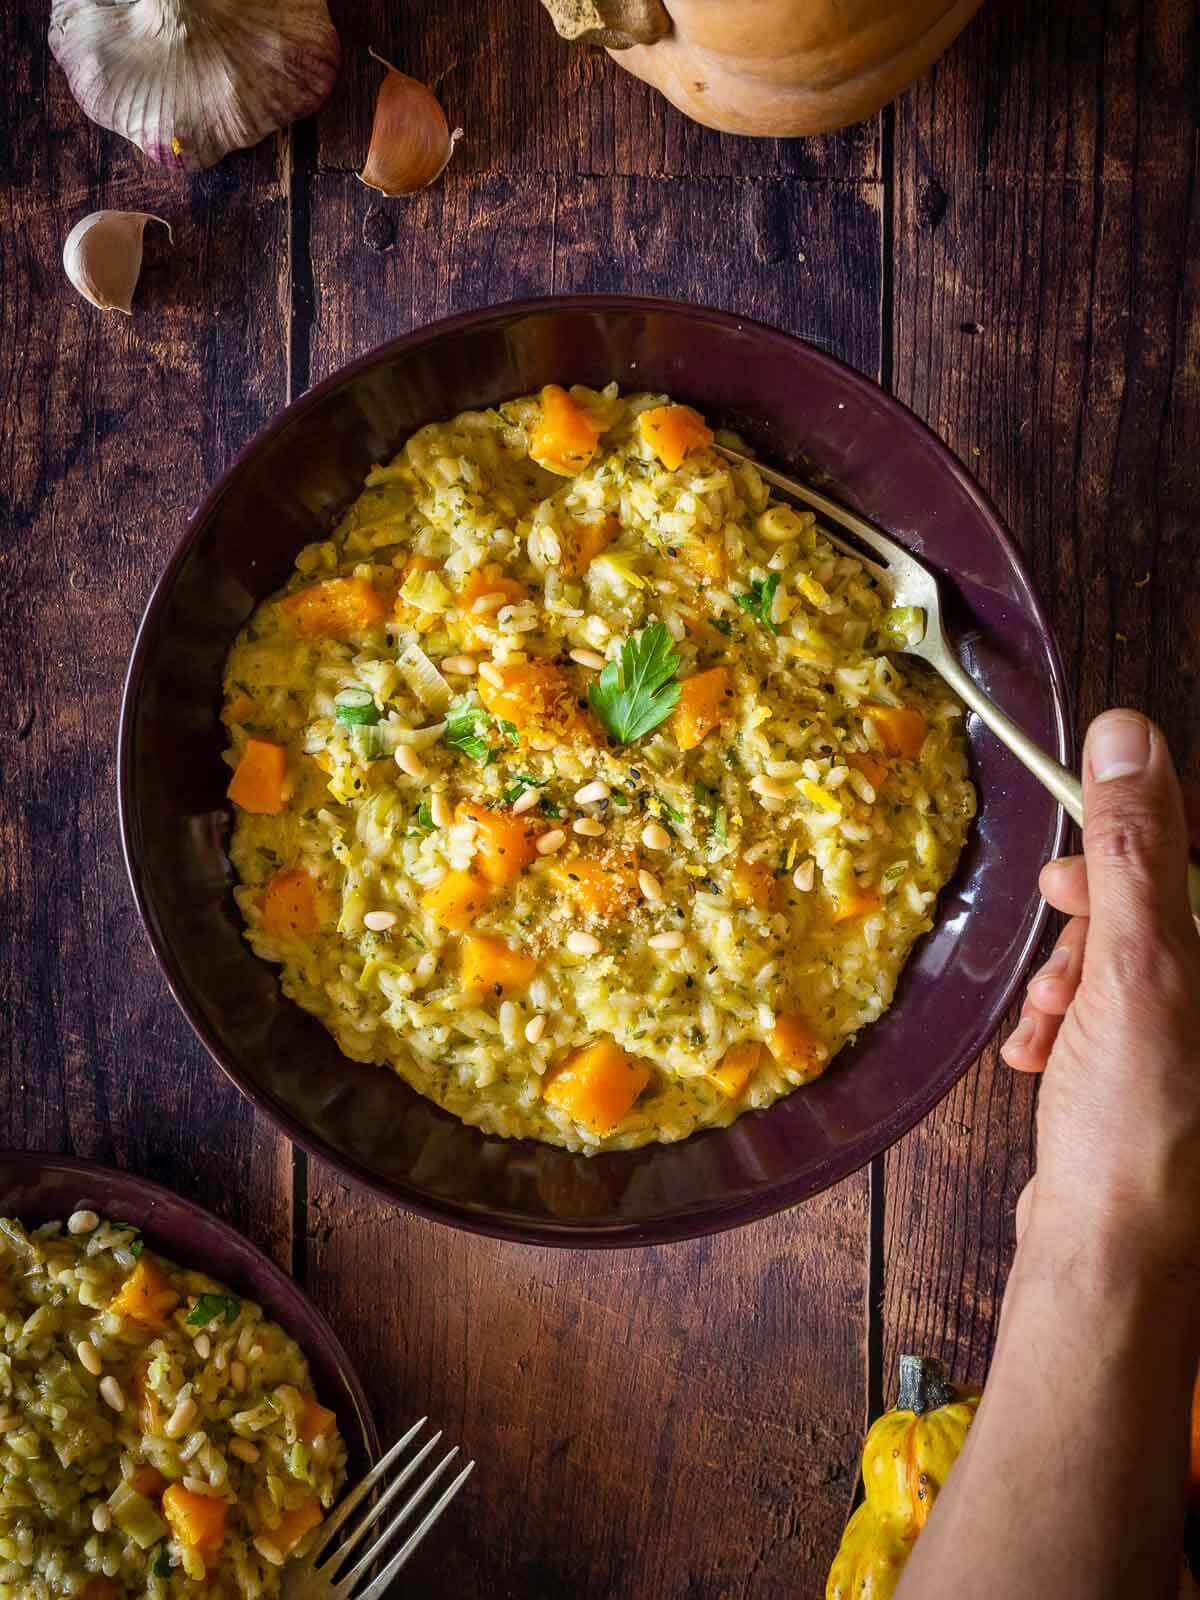 serve the butternut squash risotto with your favorite topping or vegan parmesan cheese